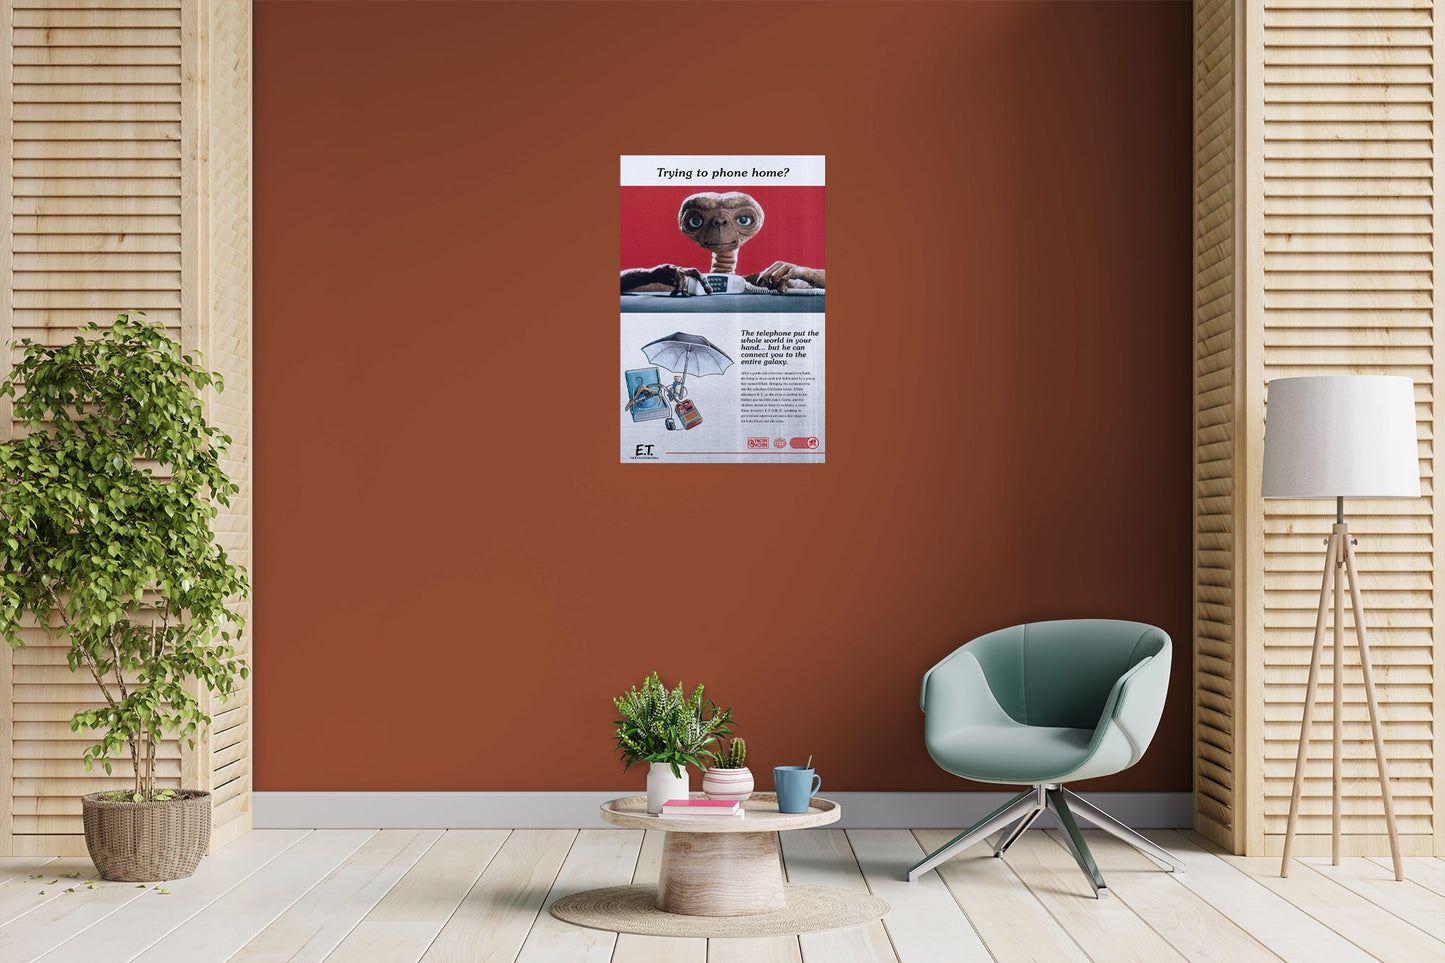 E.T.: E.T. Faux Magazine Ad 40th Anniversary Poster - Officially Licensed NBC Universal Removable Adhesive Decal